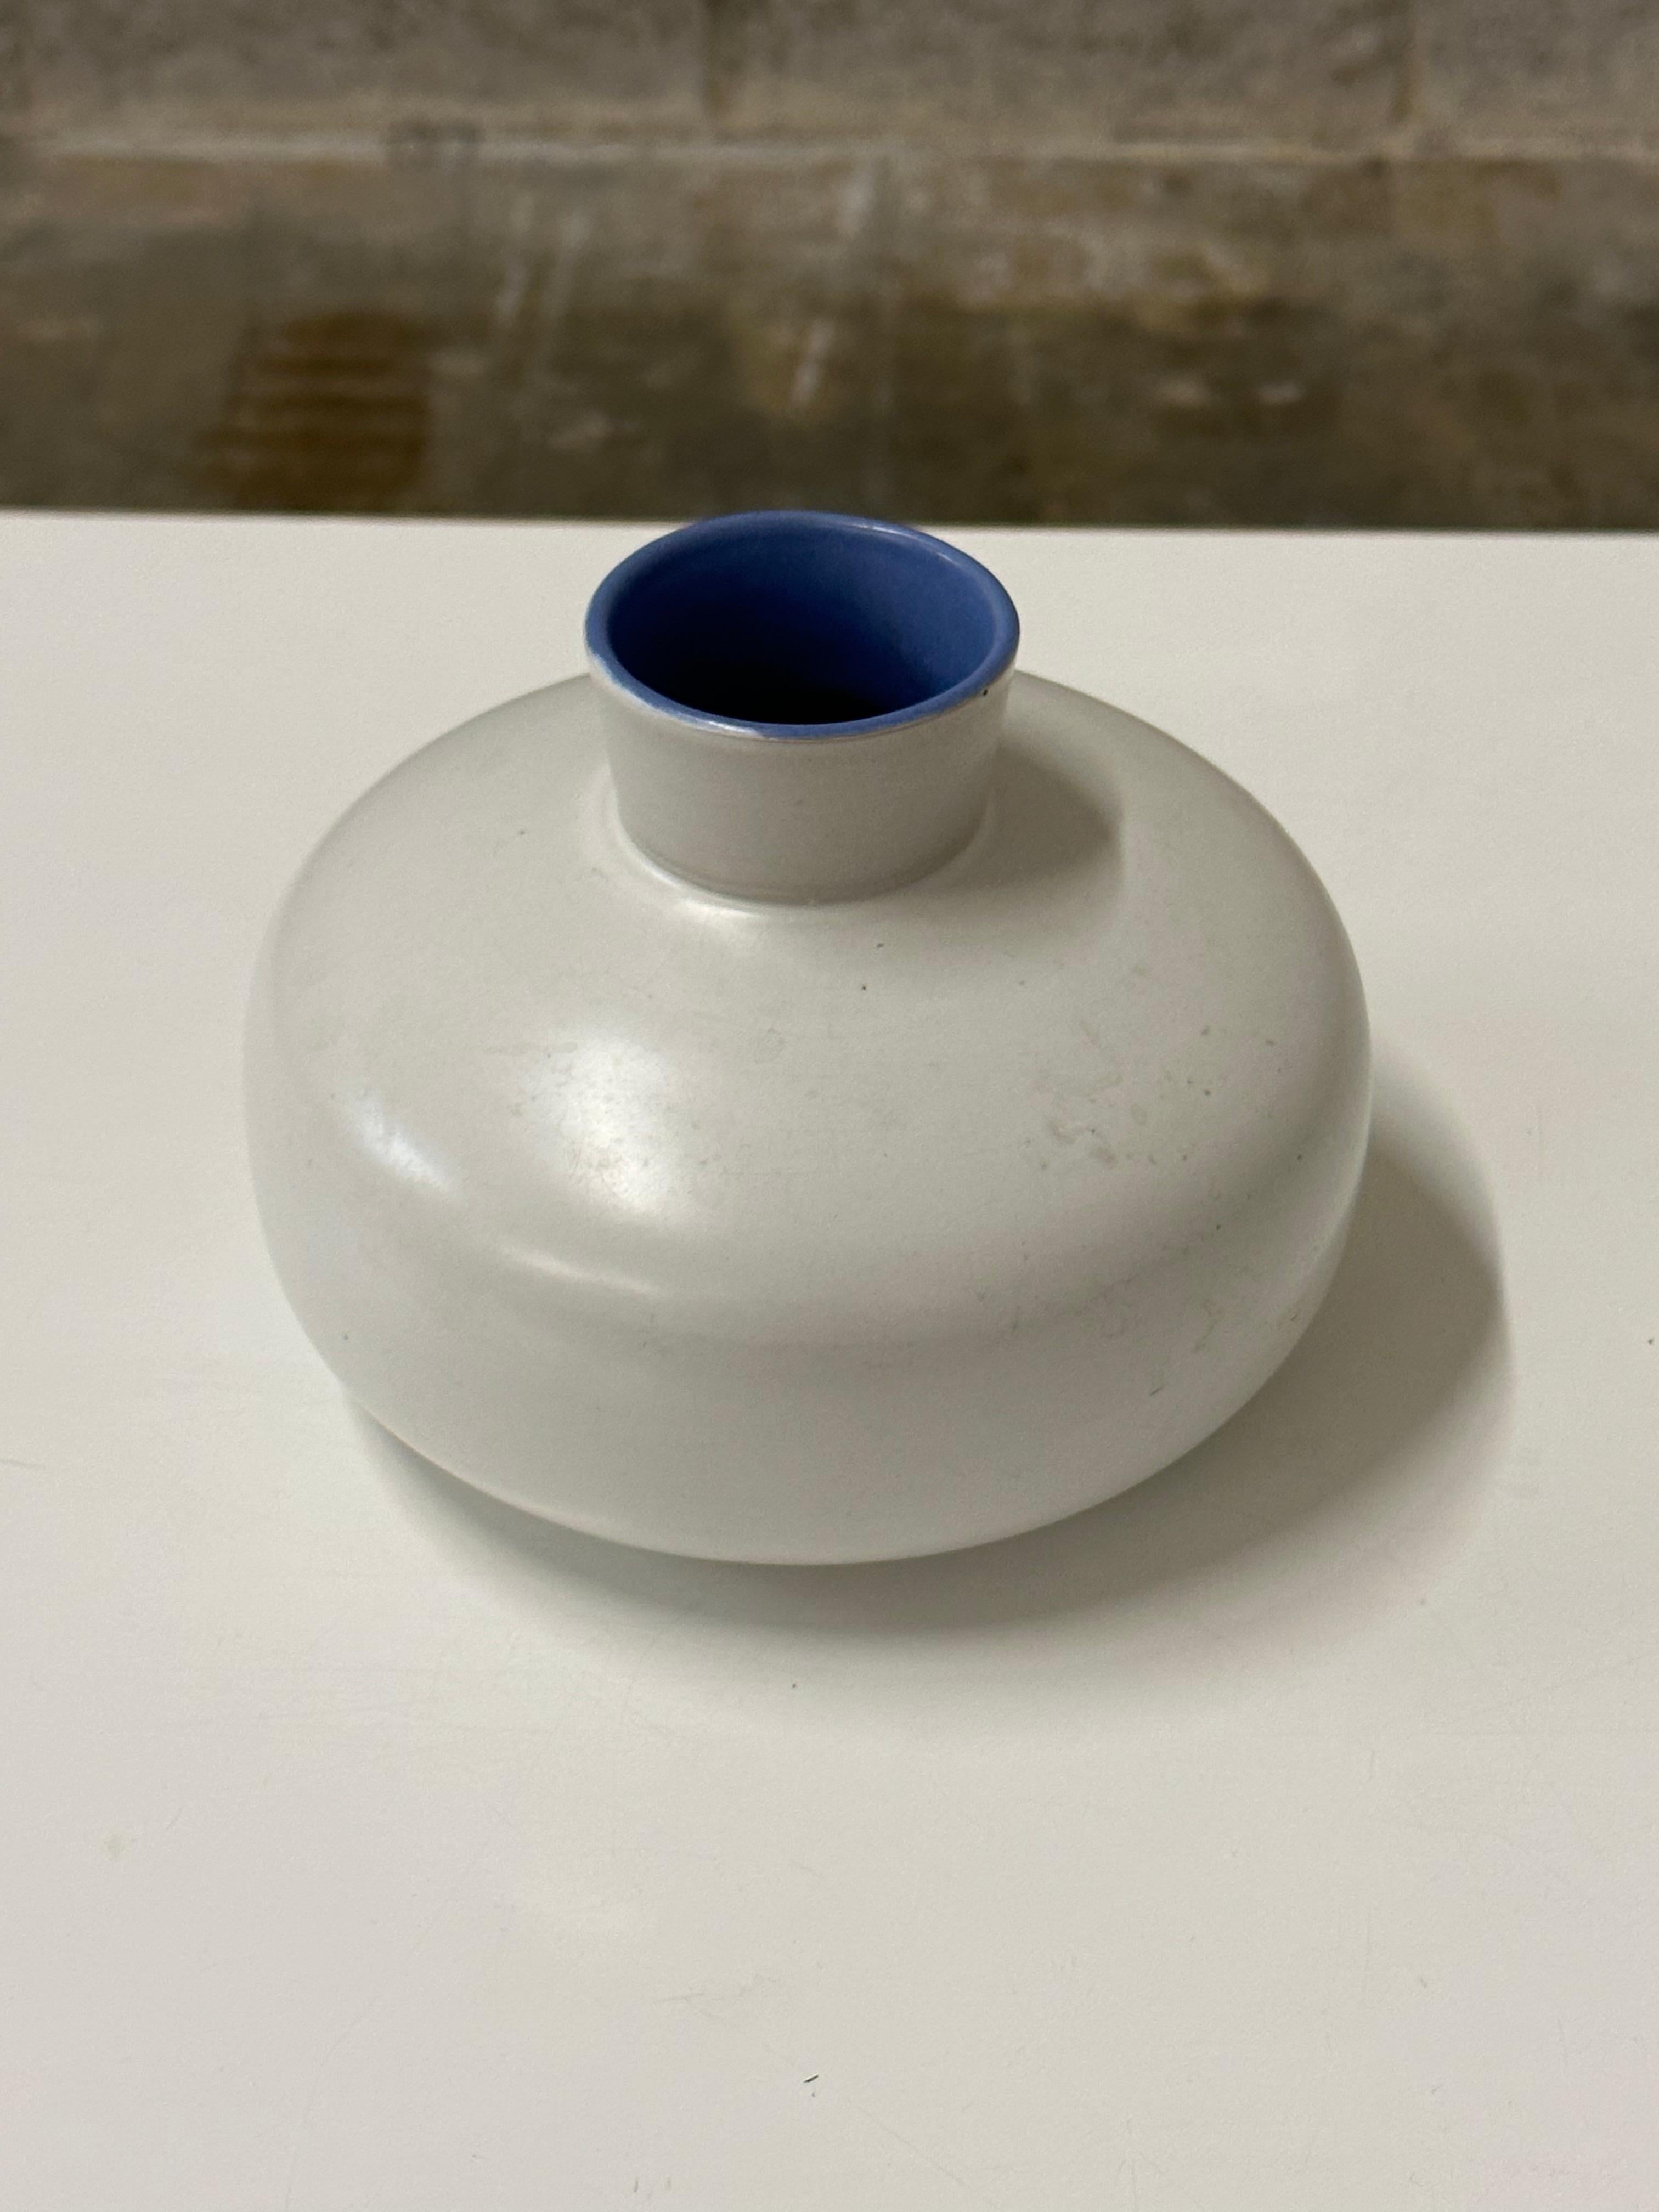 An unusual low and wide vase by Jerk Werkmäster for Nittsjö. Features a squat body and short neck with very interesting interior color of blue vs the flat white body. A very unique shape and color. Signed JW on underside.